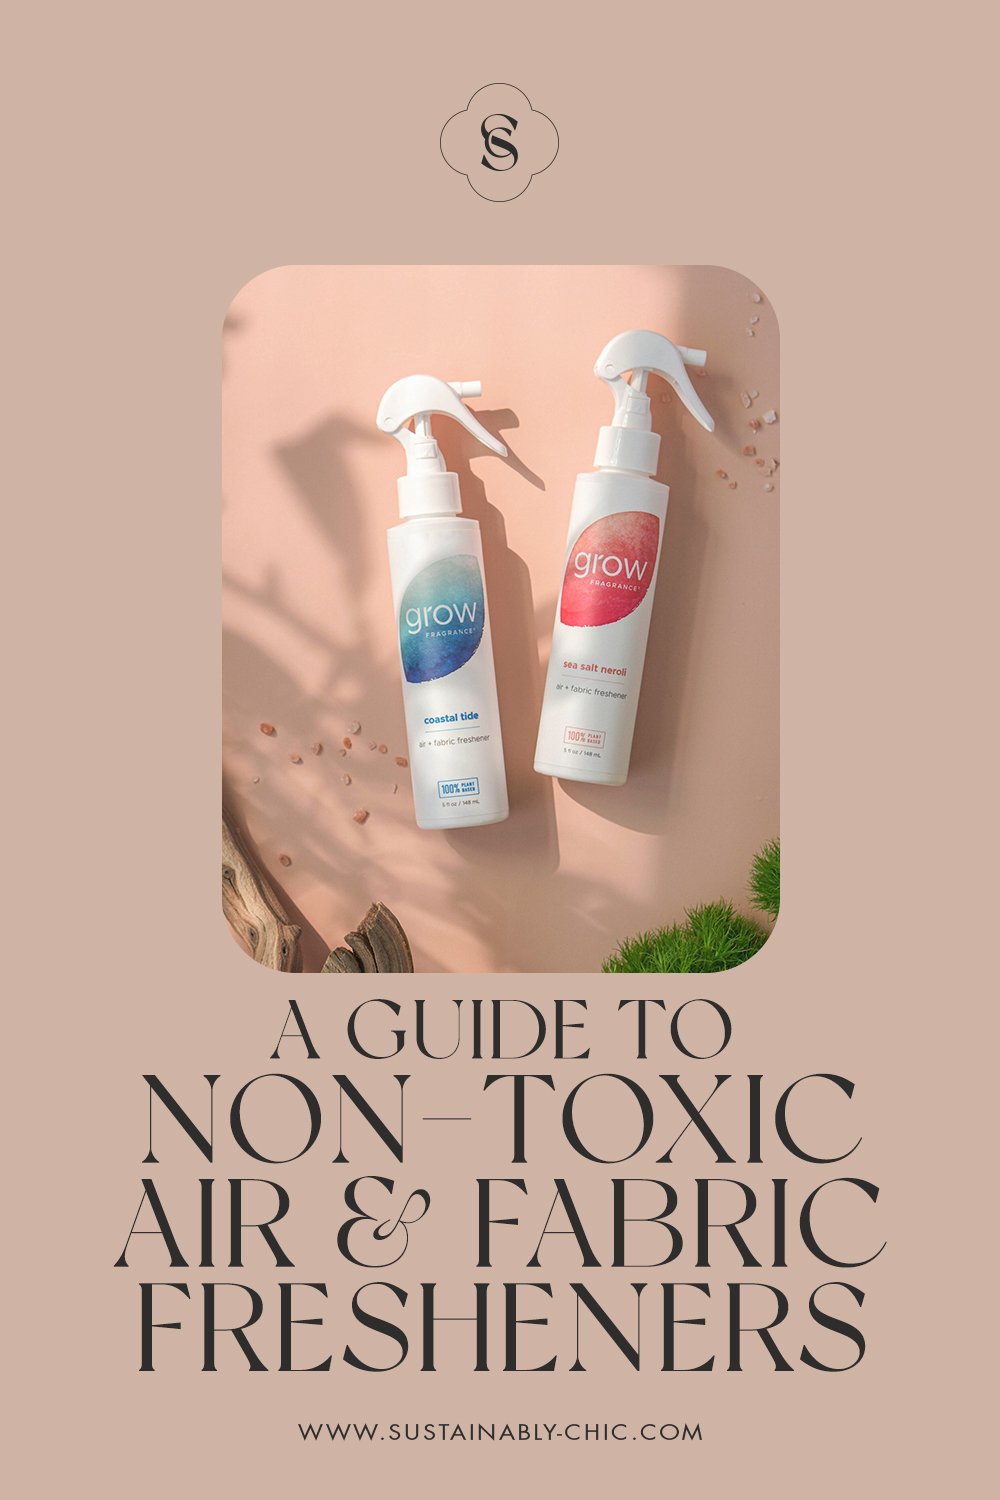 11 Eco-Friendly, Non-Toxic Air & Fabric Fresheners Better than